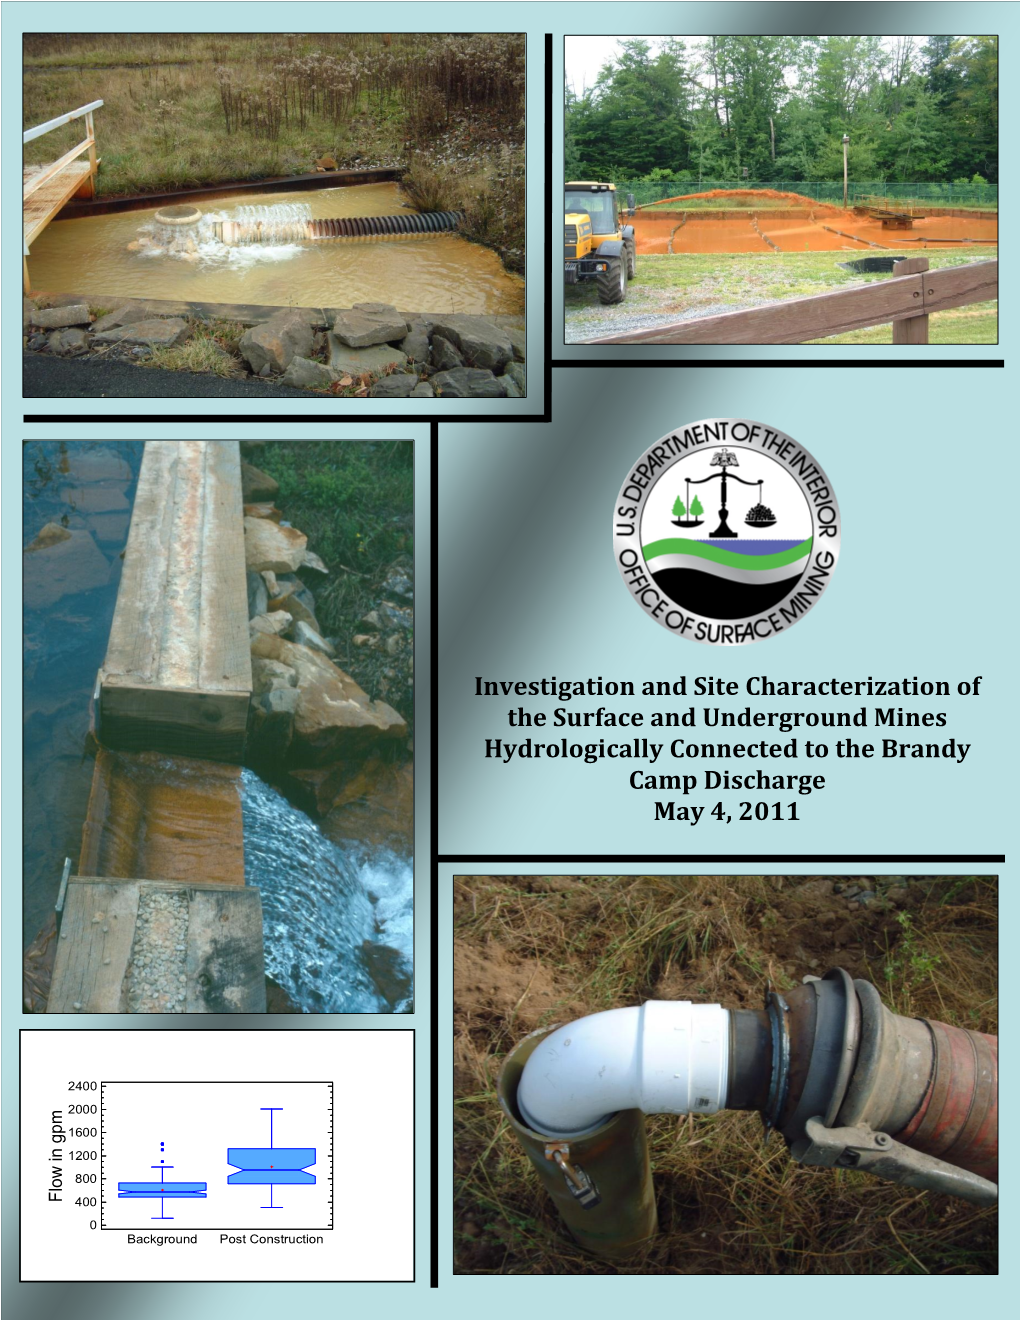 Investigation and Site Characterization of the Surface and Underground Mines Hydrologically Connected to the Brandy Camp Discharge May 4, 2011